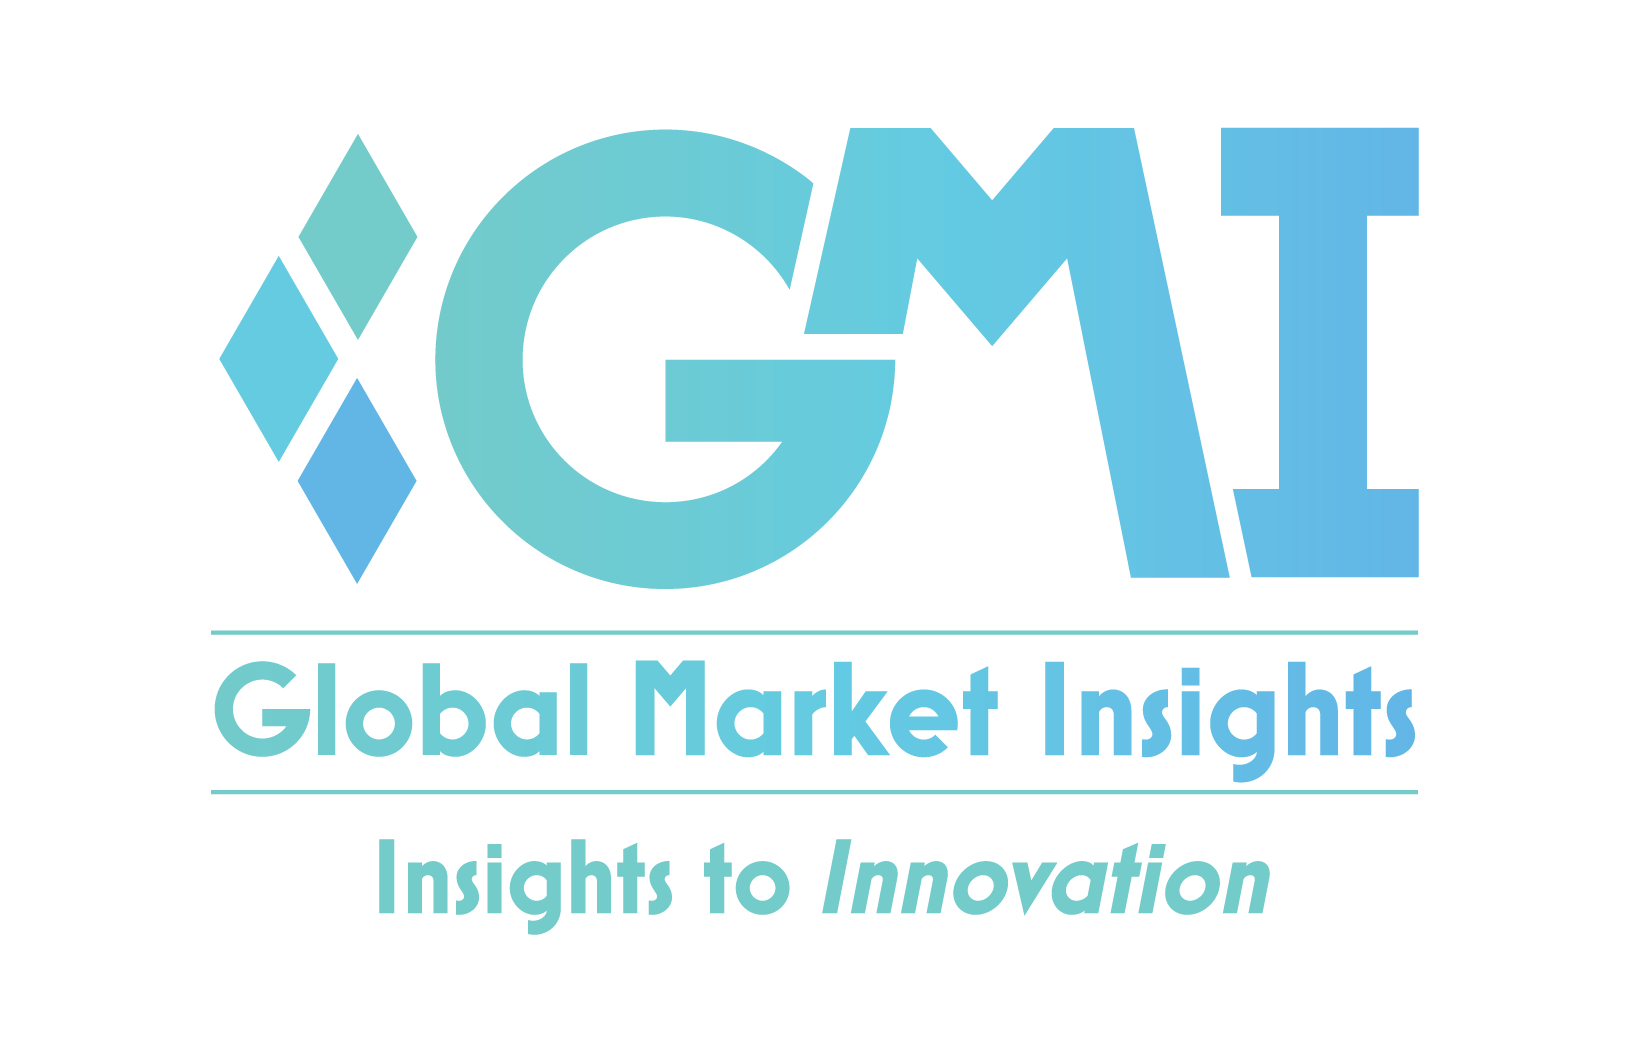 Isothermal Nucleic Acid Amplification Technology Market to cross USD 2.8 Billion by 2028: Global Market Insights Inc.